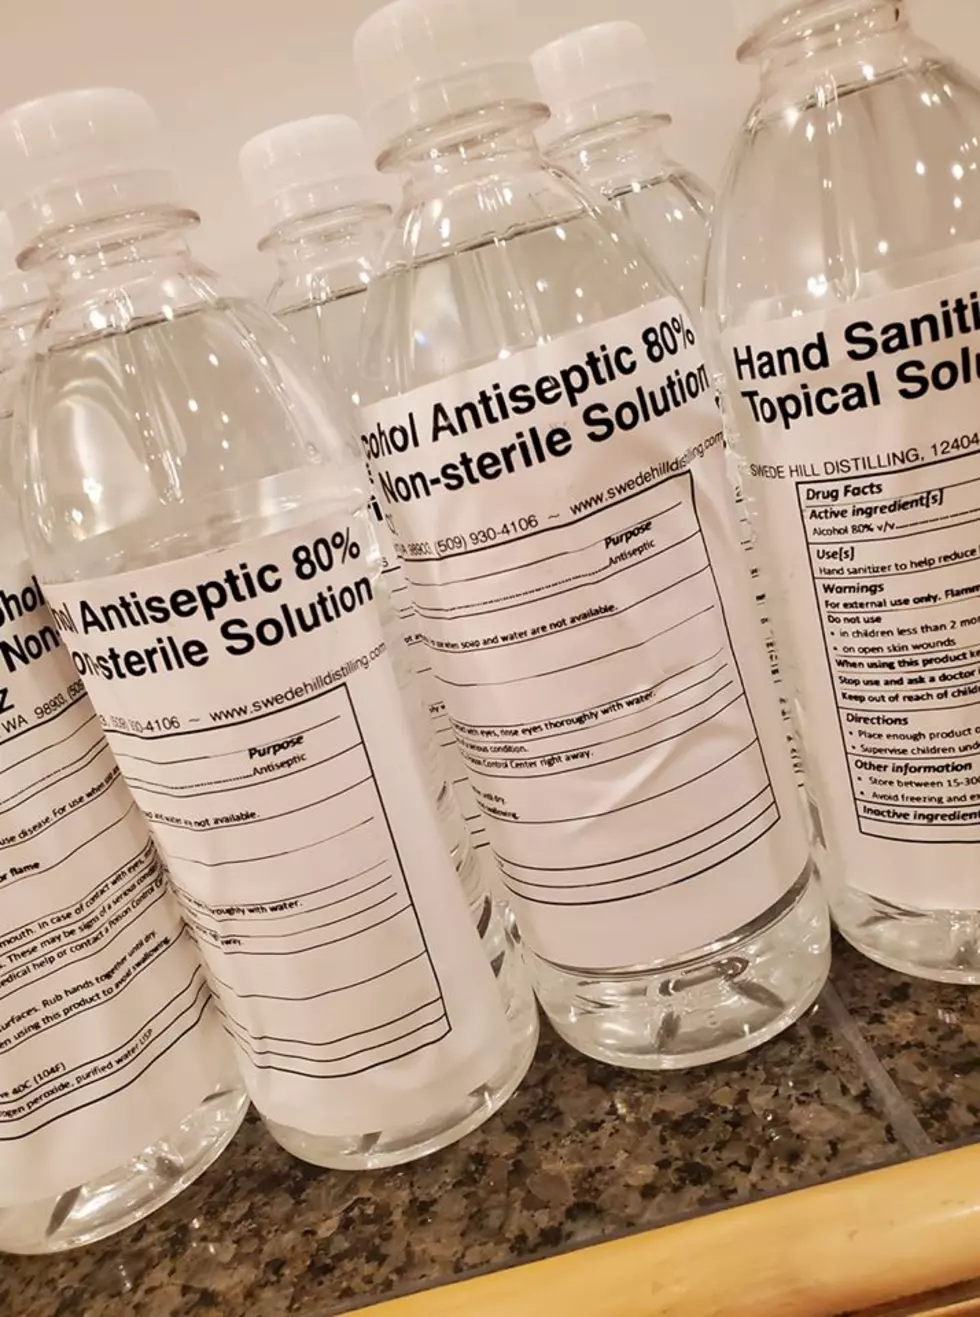 Yakima’s Swede Hill Distilling Now Producing Hand Sanitizer